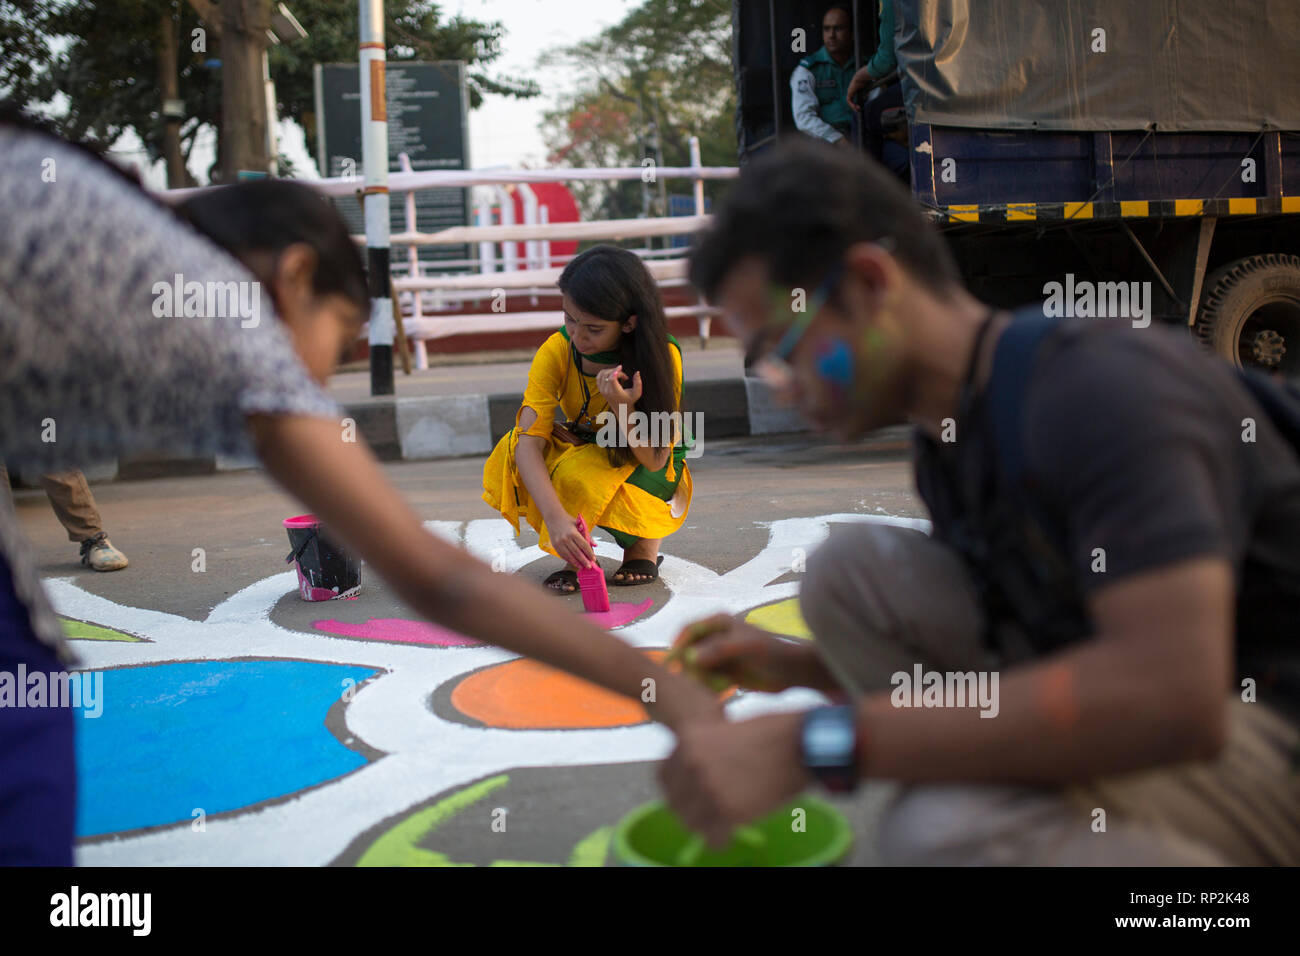 Dhaka, Bangladesh. 20th Feb, 2019.  Bangladeshi students paints on the street as part of the decoration for the International Mother Language Day celebration in front of the language matyrs monument  in Dhaka, Bangladesh on February 20, 2019.  The nation will pay tribute to the Bangla language movement martyrs who sacrificed their life for their mother tongue in 1952, while the United Nations Educational Scientific and Cultural Organization (UNESCO) declared 21 February as the International Mother Language Day. Credit: zakir hossain chowdhury zakir/Alamy Live N Stock Photo